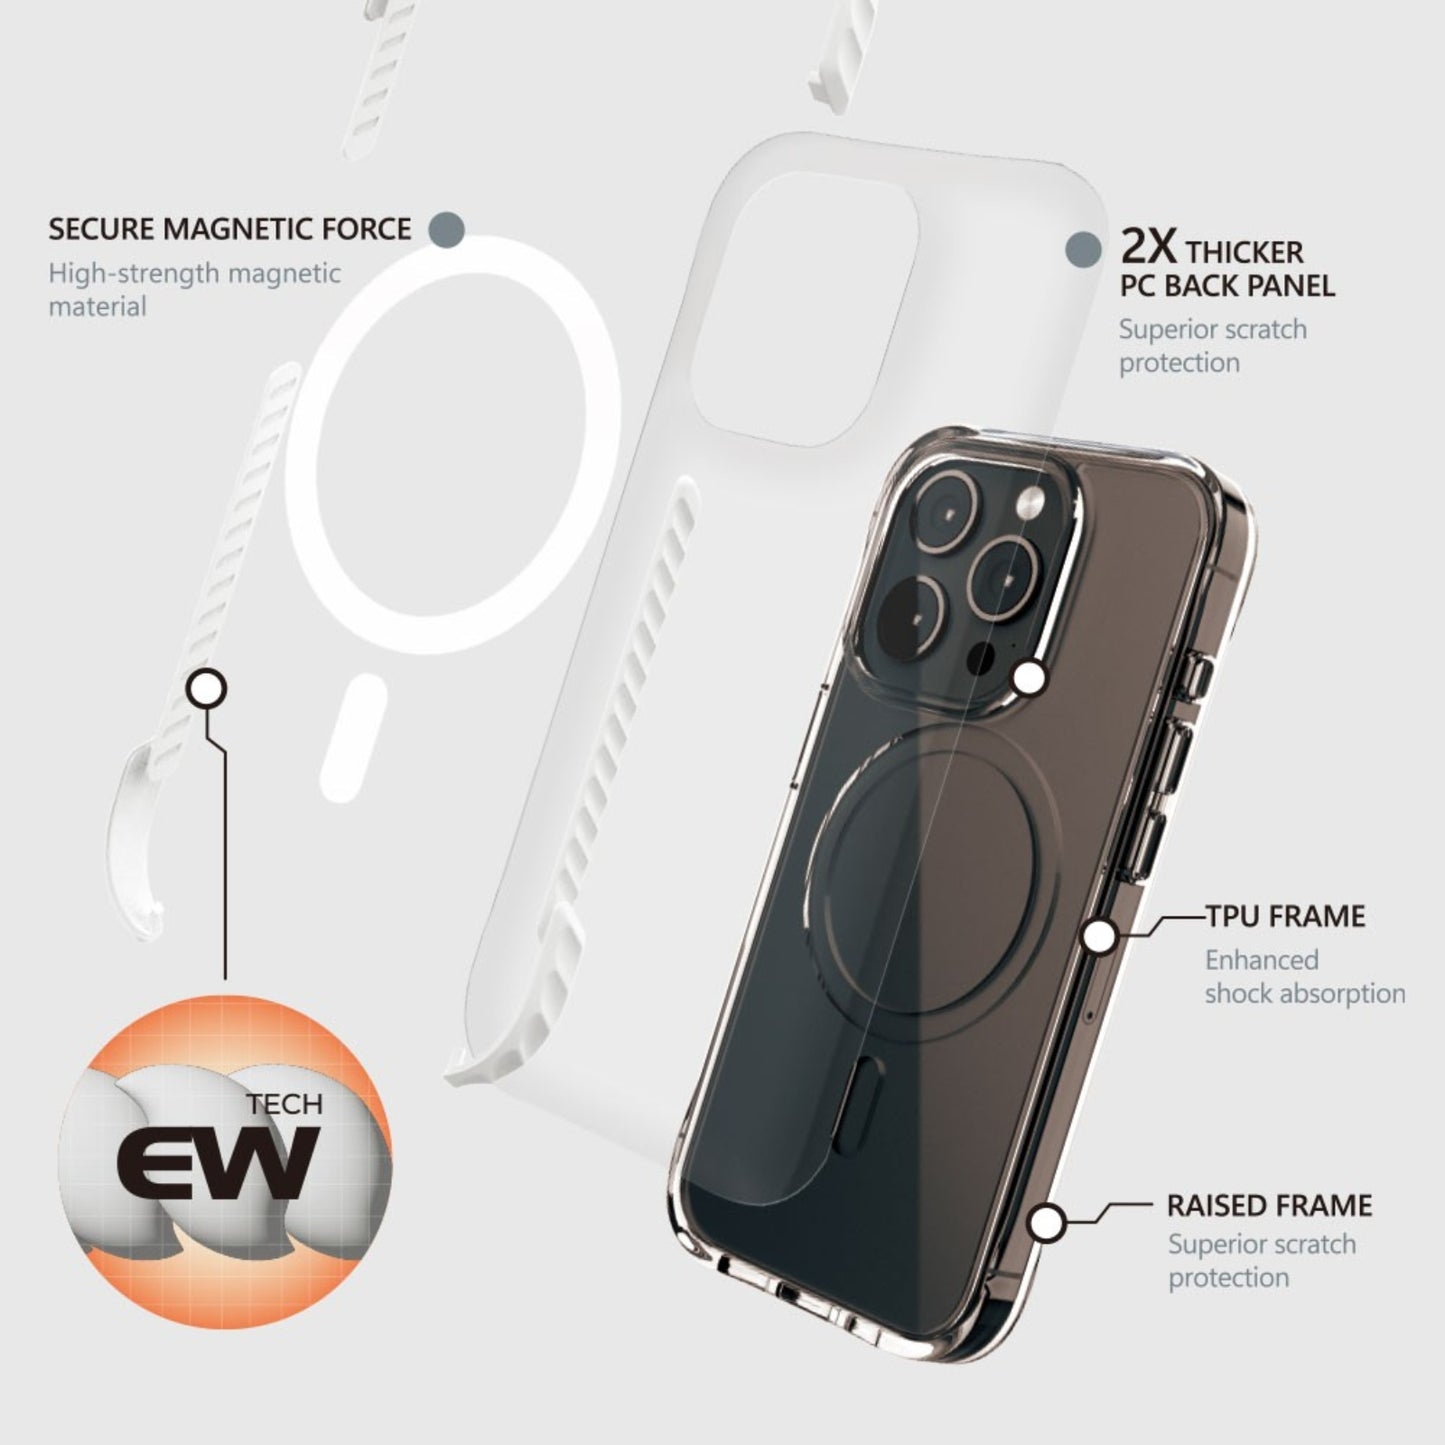 ReDefine Echo Wave Ultimate Impact Protection Case for iPhone 15 Plus